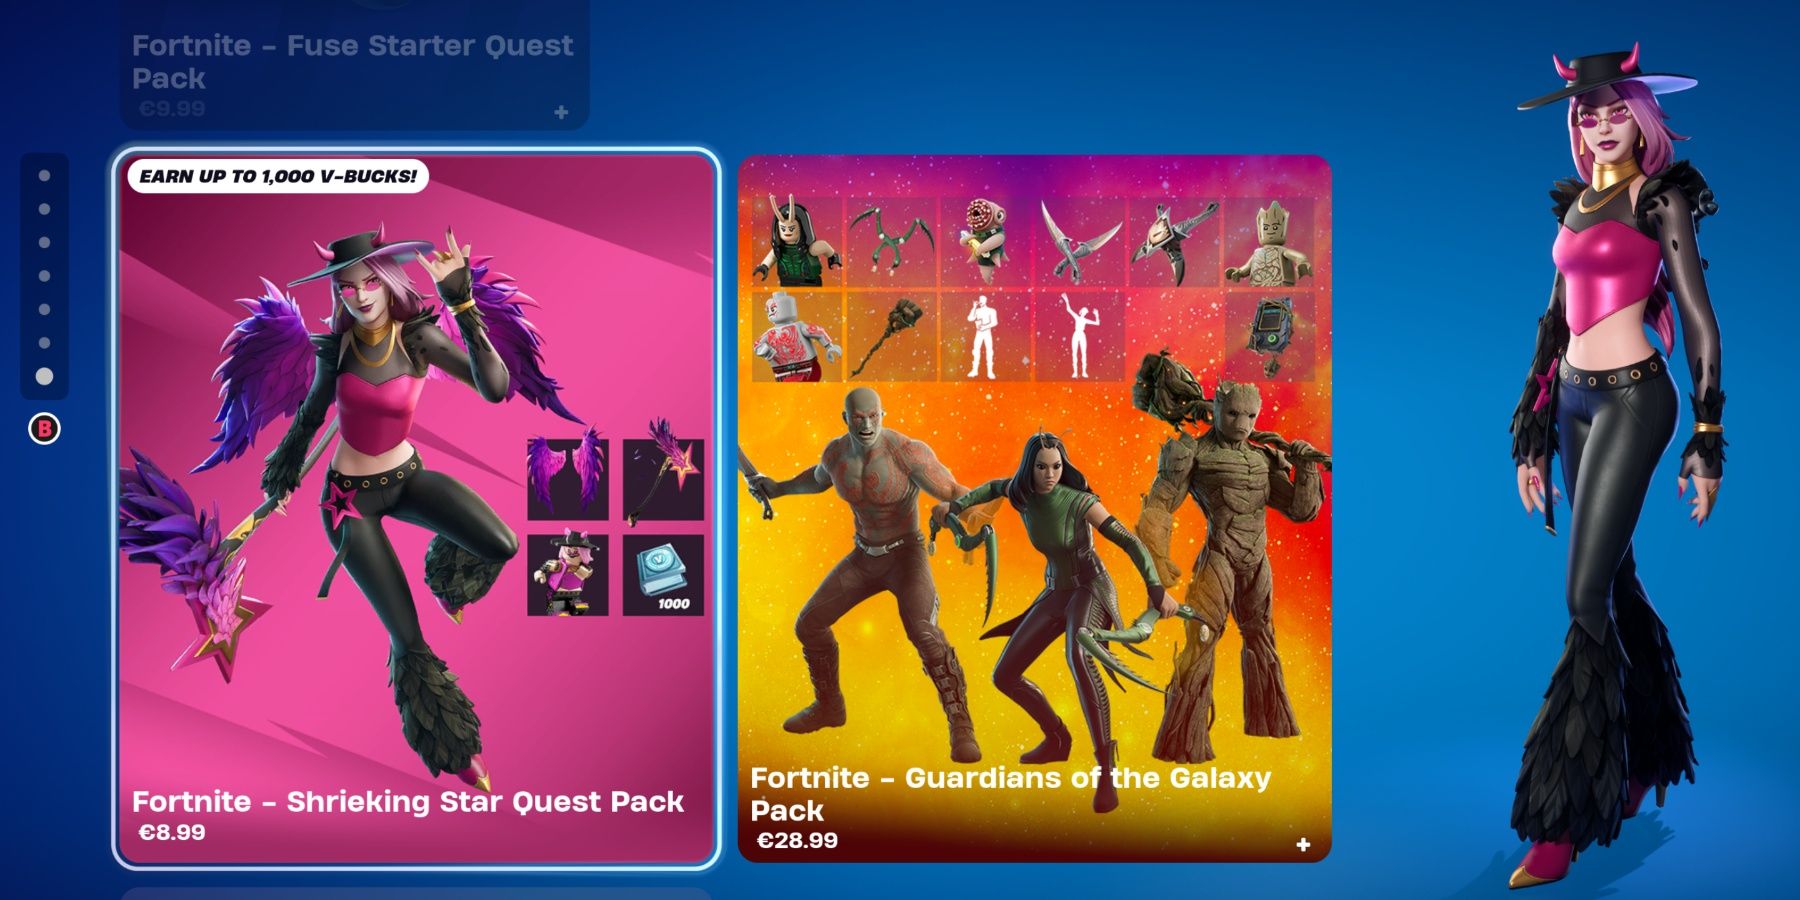 shrieking star quest pack in the item shop special offers and bundles section